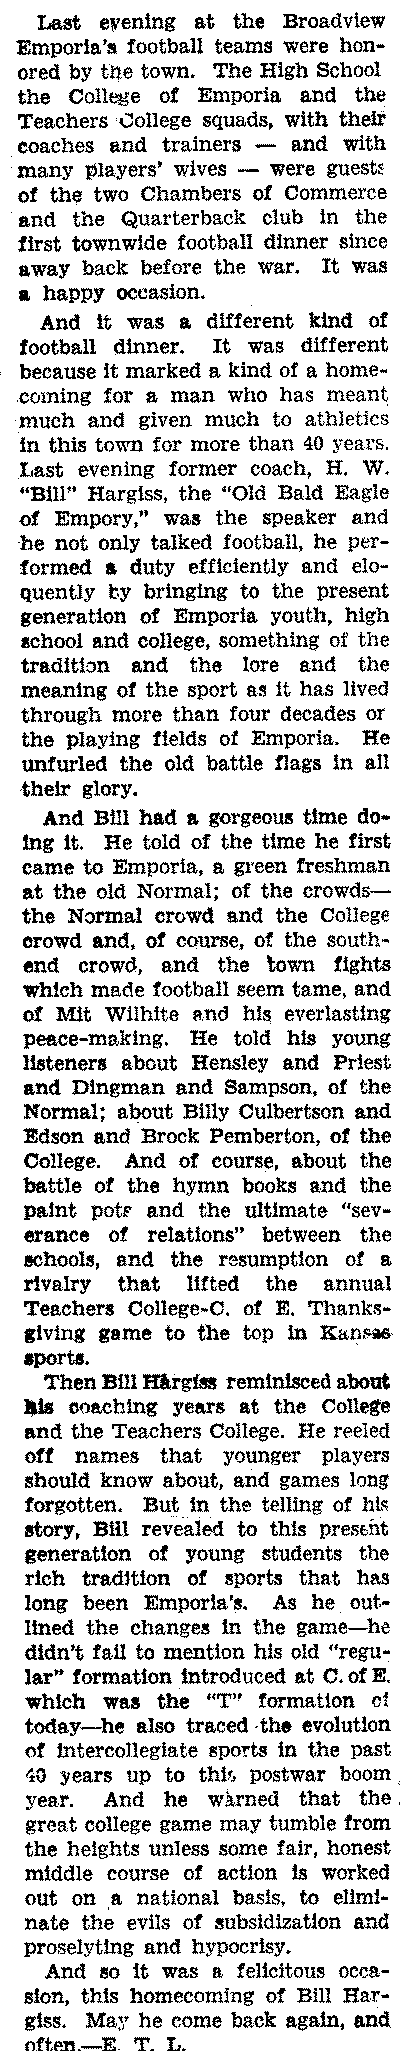 E. T. Lowther column on Bill Hargiss in 1946